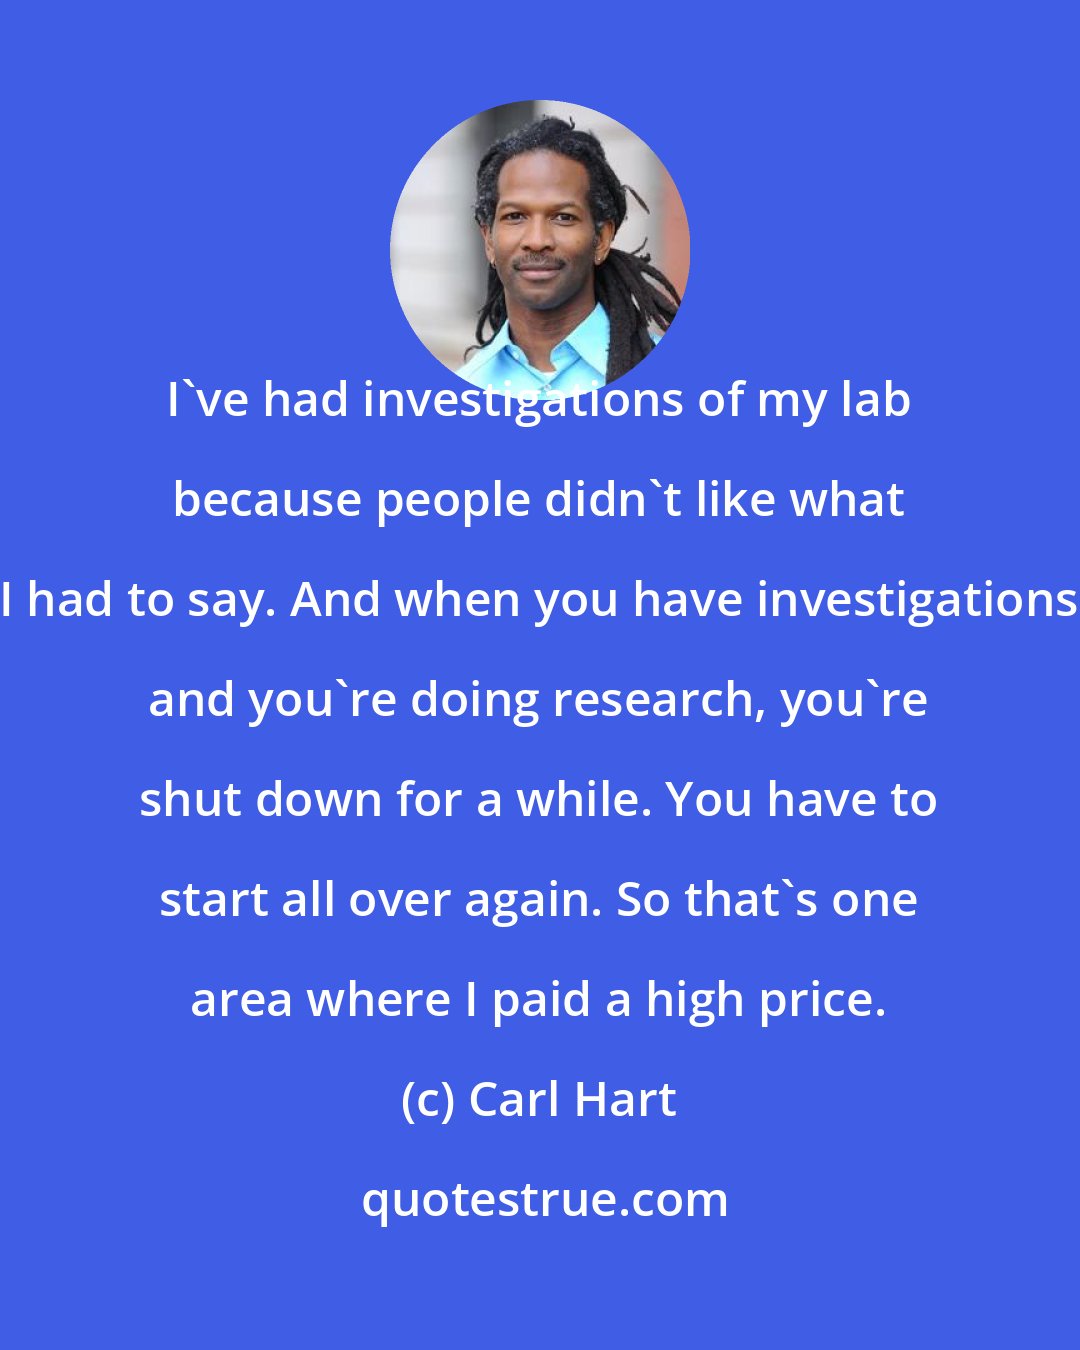 Carl Hart: I've had investigations of my lab because people didn't like what I had to say. And when you have investigations and you're doing research, you're shut down for a while. You have to start all over again. So that's one area where I paid a high price.